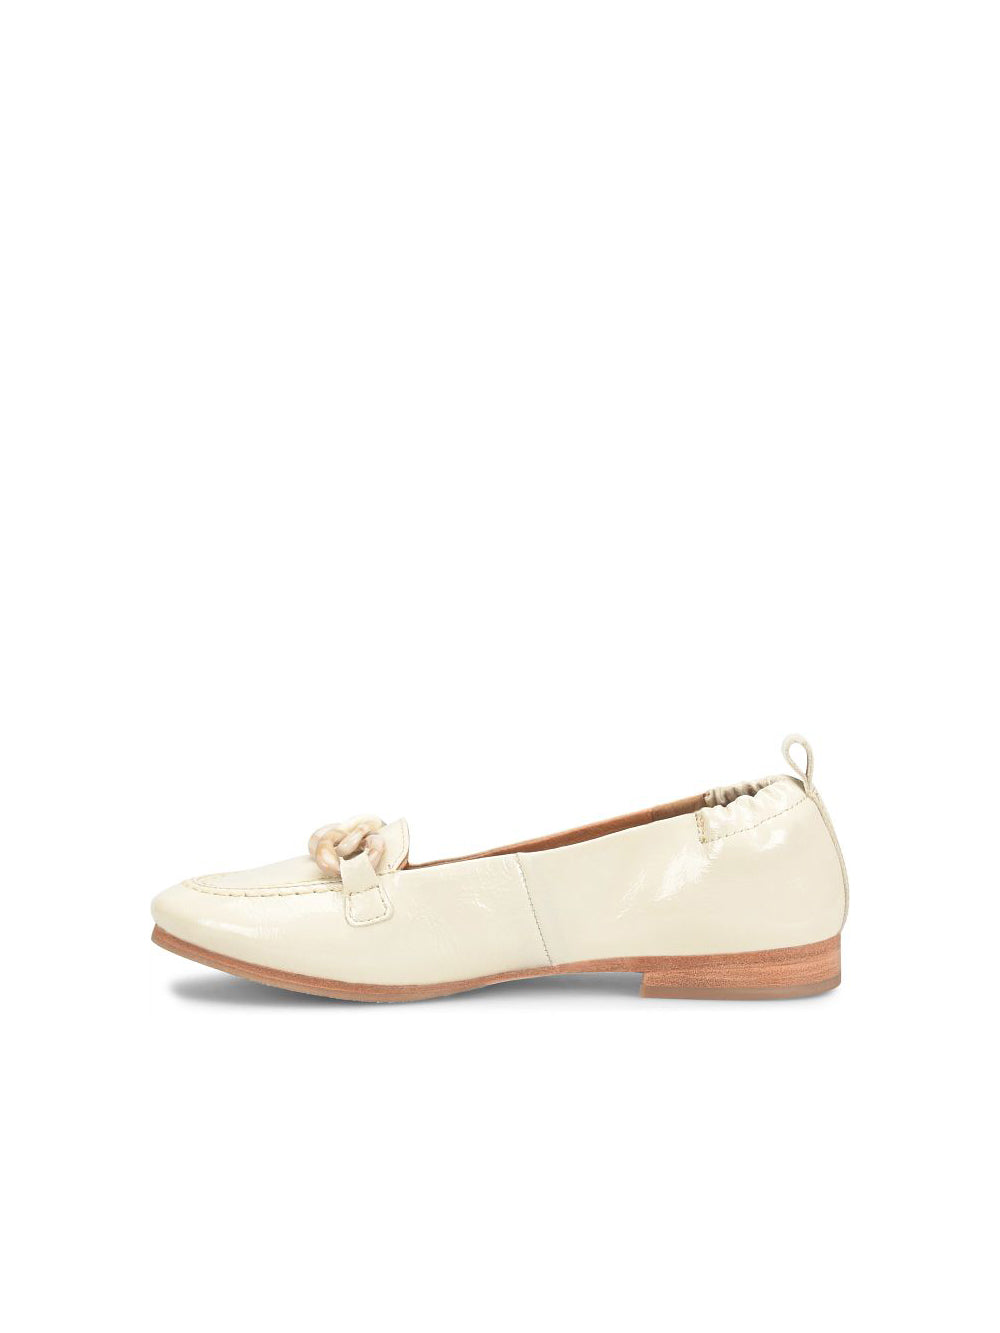 sofft shoes kadyn chain link ballet flat in tapioca white